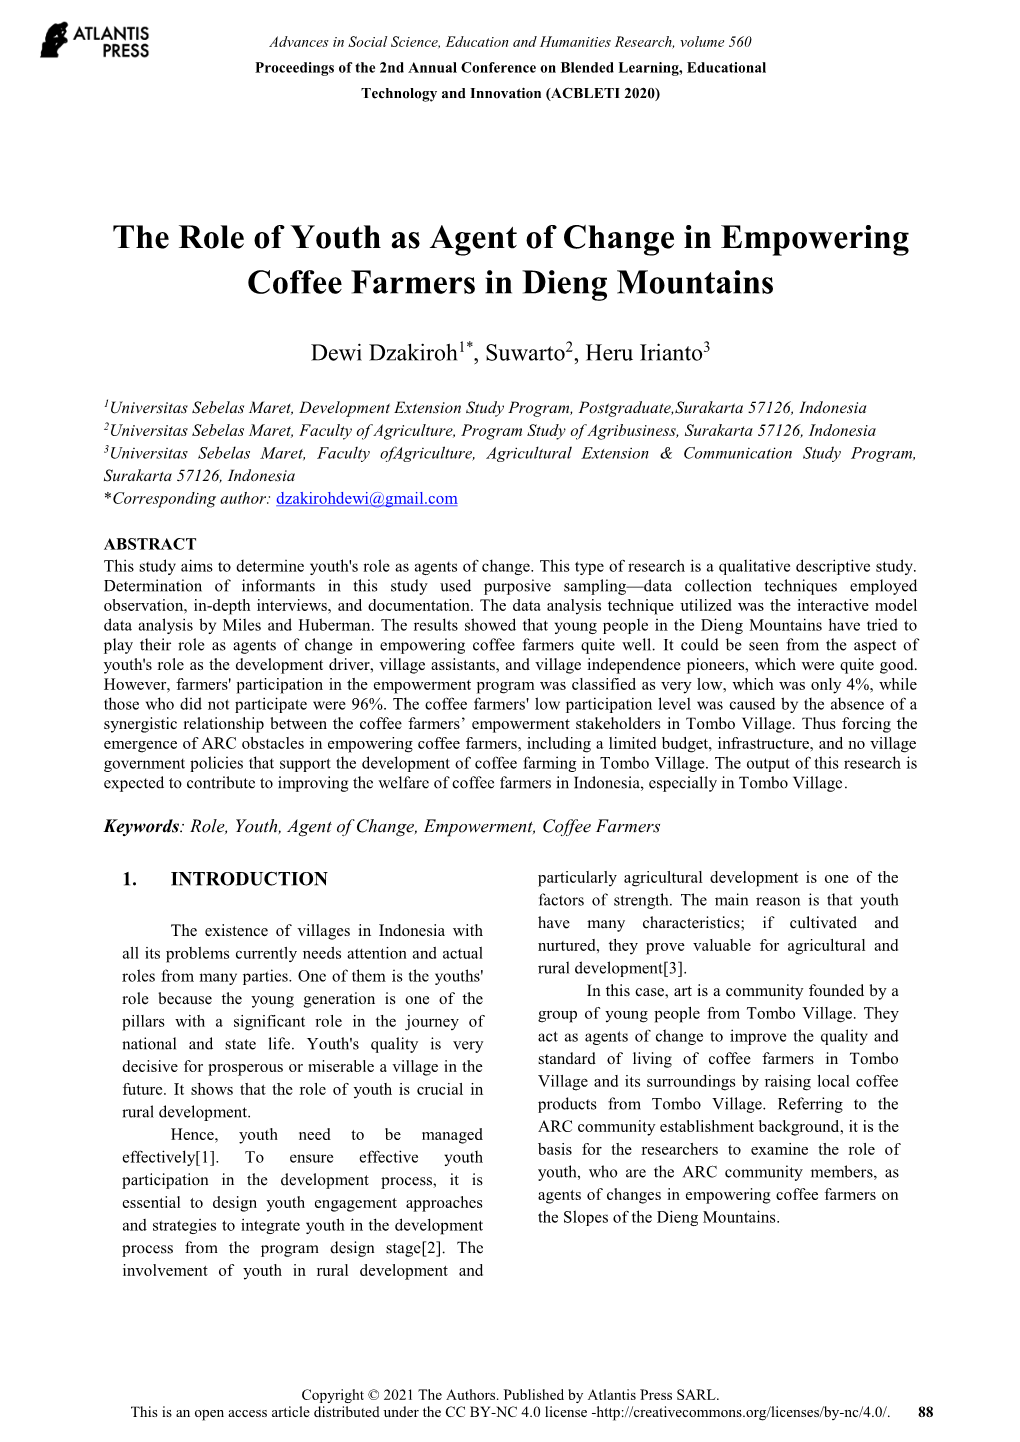 The Role of Youth As Agent of Change in Empowering Coffee Farmers in Dieng Mountains